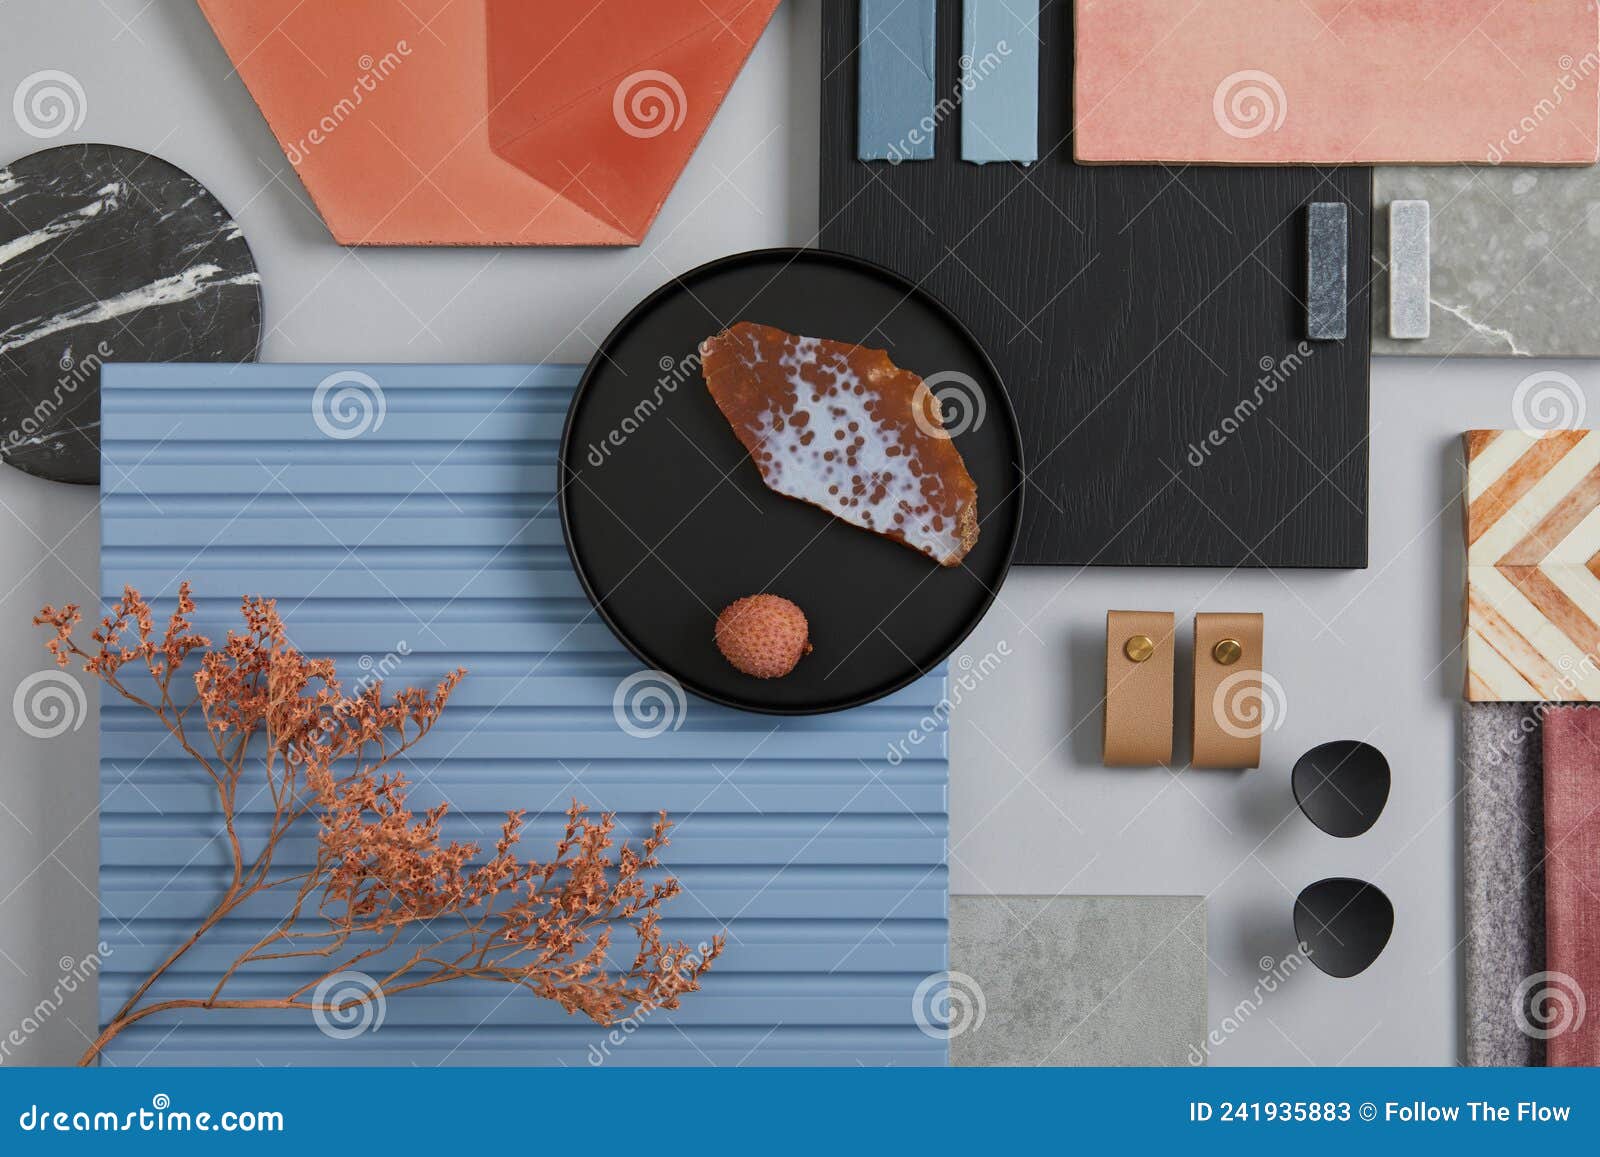 creative flat lay composition of interior er mood board with textile and paint samples, blue lamella panels and tiles.